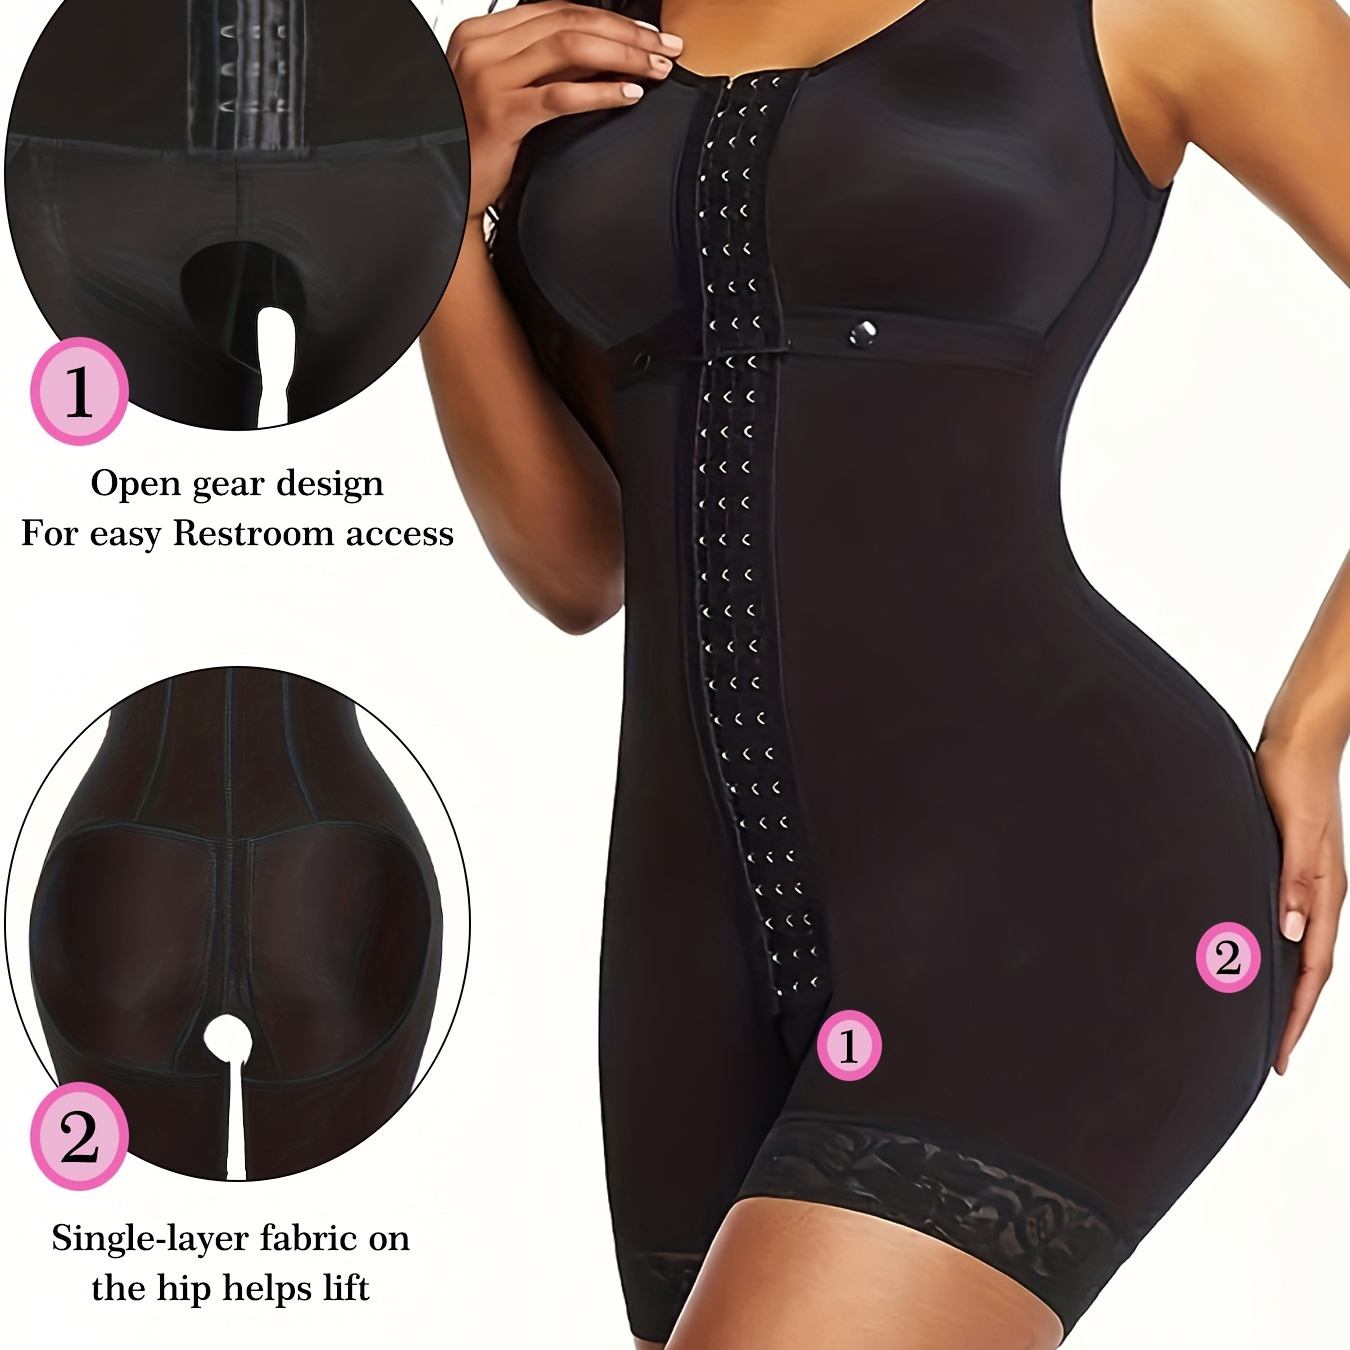 

Women's Plus Size Bodysuit Shaper With Open Crotch, Waist Cincher Tummy Control, Firm Compression Full Body Shapewear, Adjustable Slimming Faja With Thigh Slimmer And Butt Lifter Features, Lace Detail